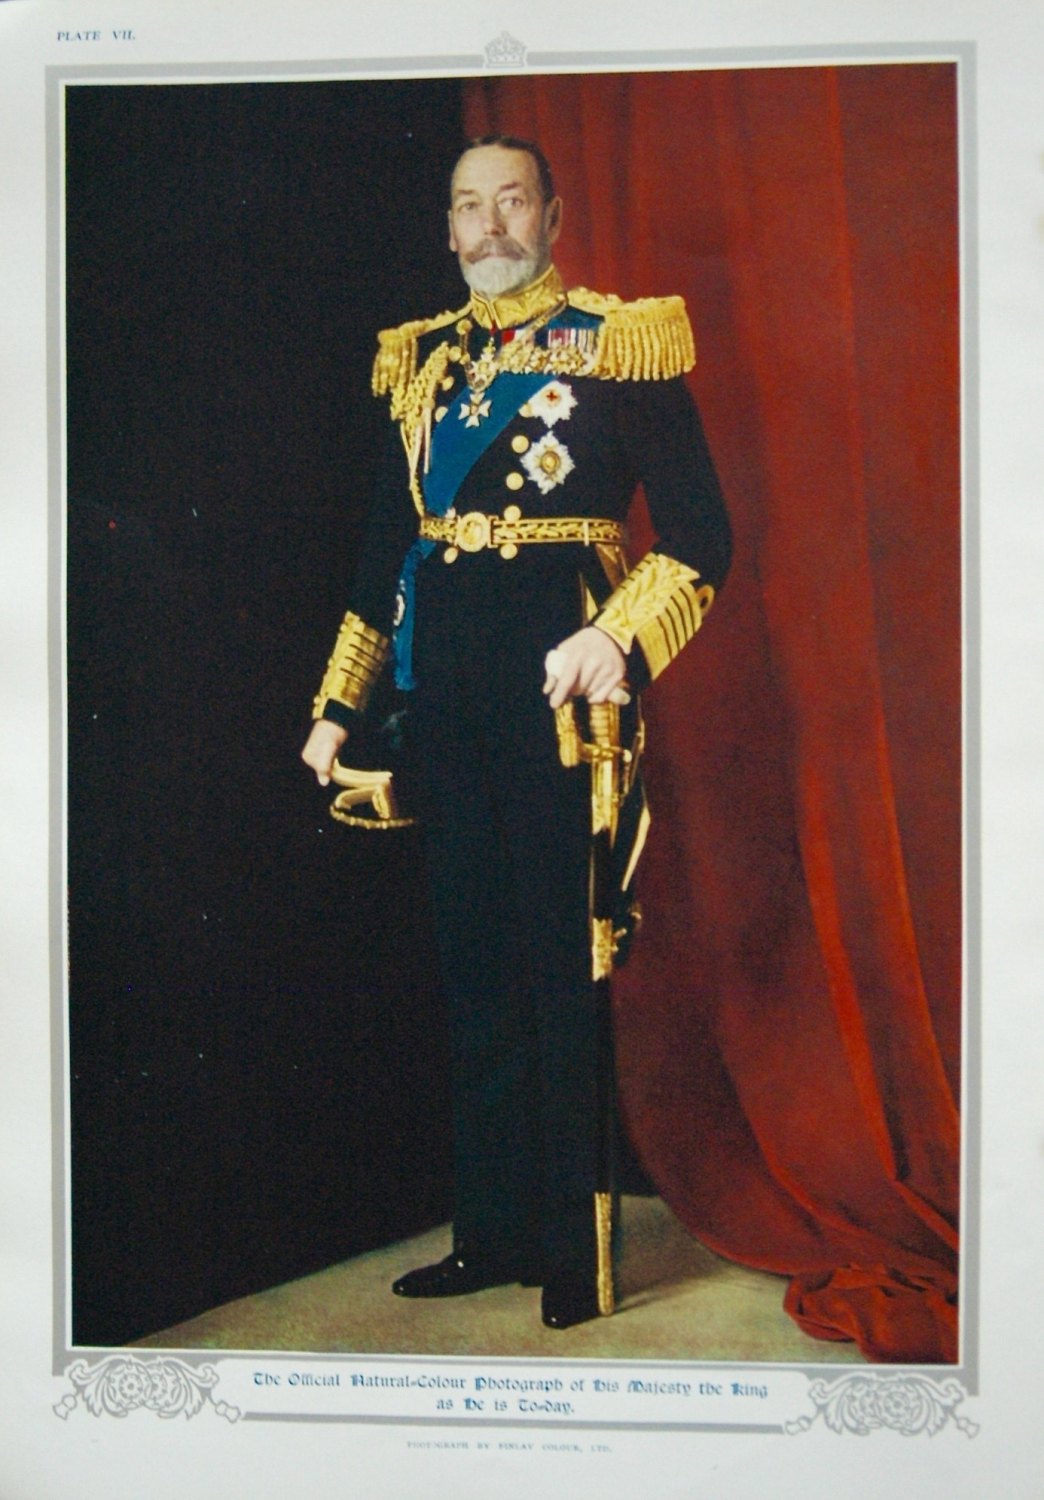 Official Natural-Colour Photograph of his Majesty the King as he is To-day.